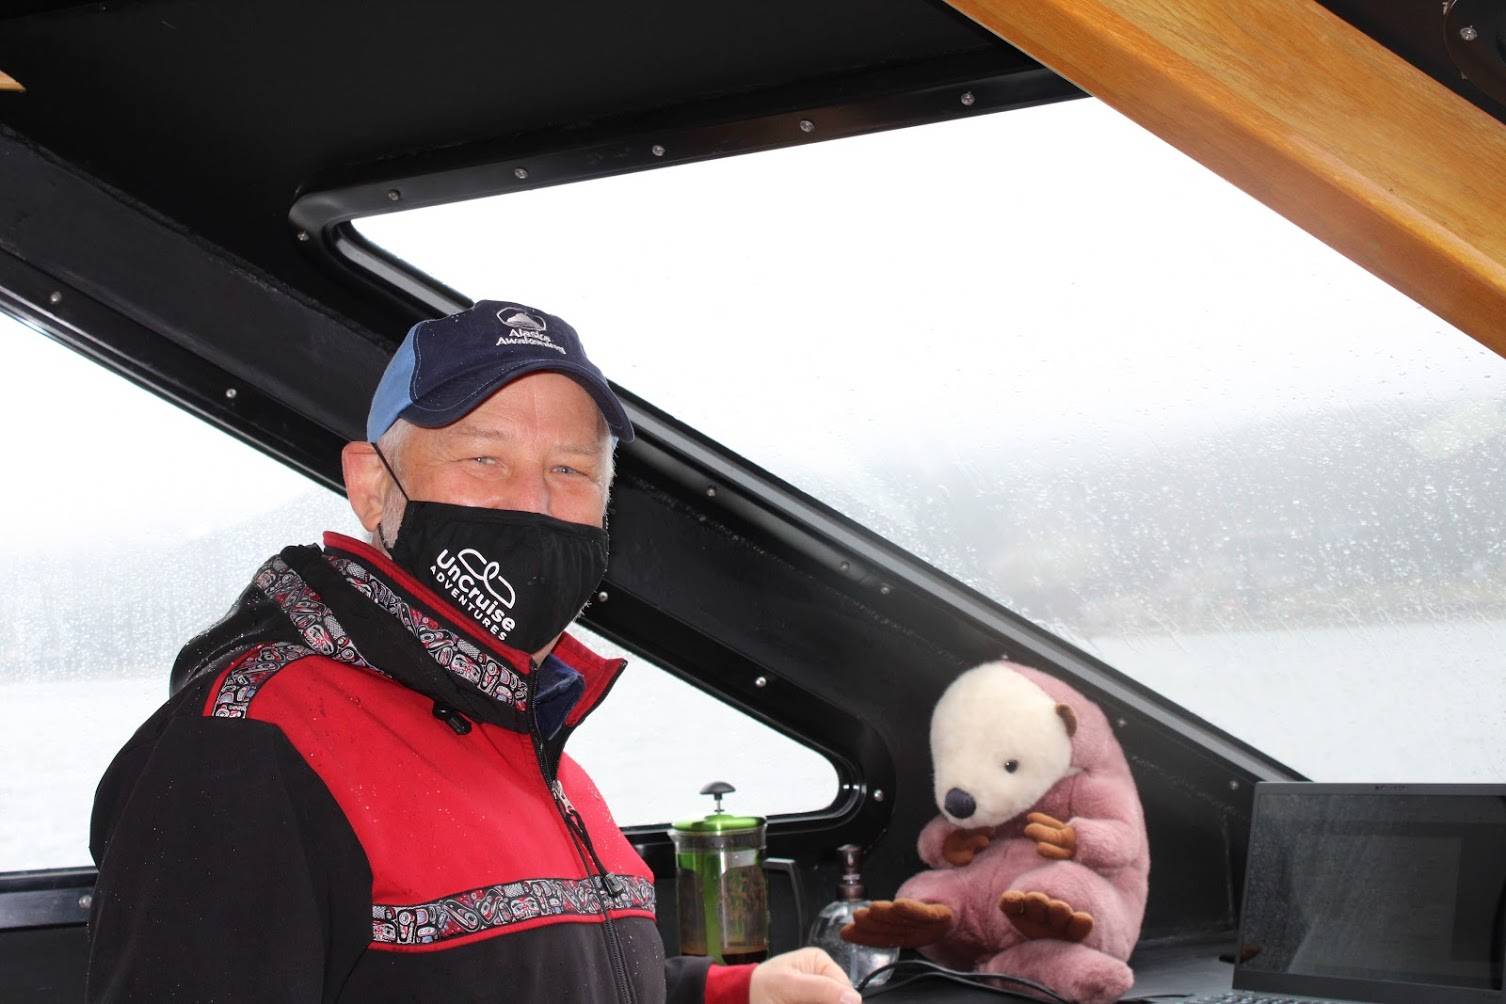 Dan Blanchard, CEO of UnCruise Adventures stands at the bridge of the Safari Quest, one of several boats that will ply Alaksa's waters this season. He said the stuffed animal is the ship's official mascot. His daughter, Denee Blanchard, is the captain of the vessel, which left Juneau for a weeklong cruise on May 15. (Dana Zigmund/Juneau Empire)